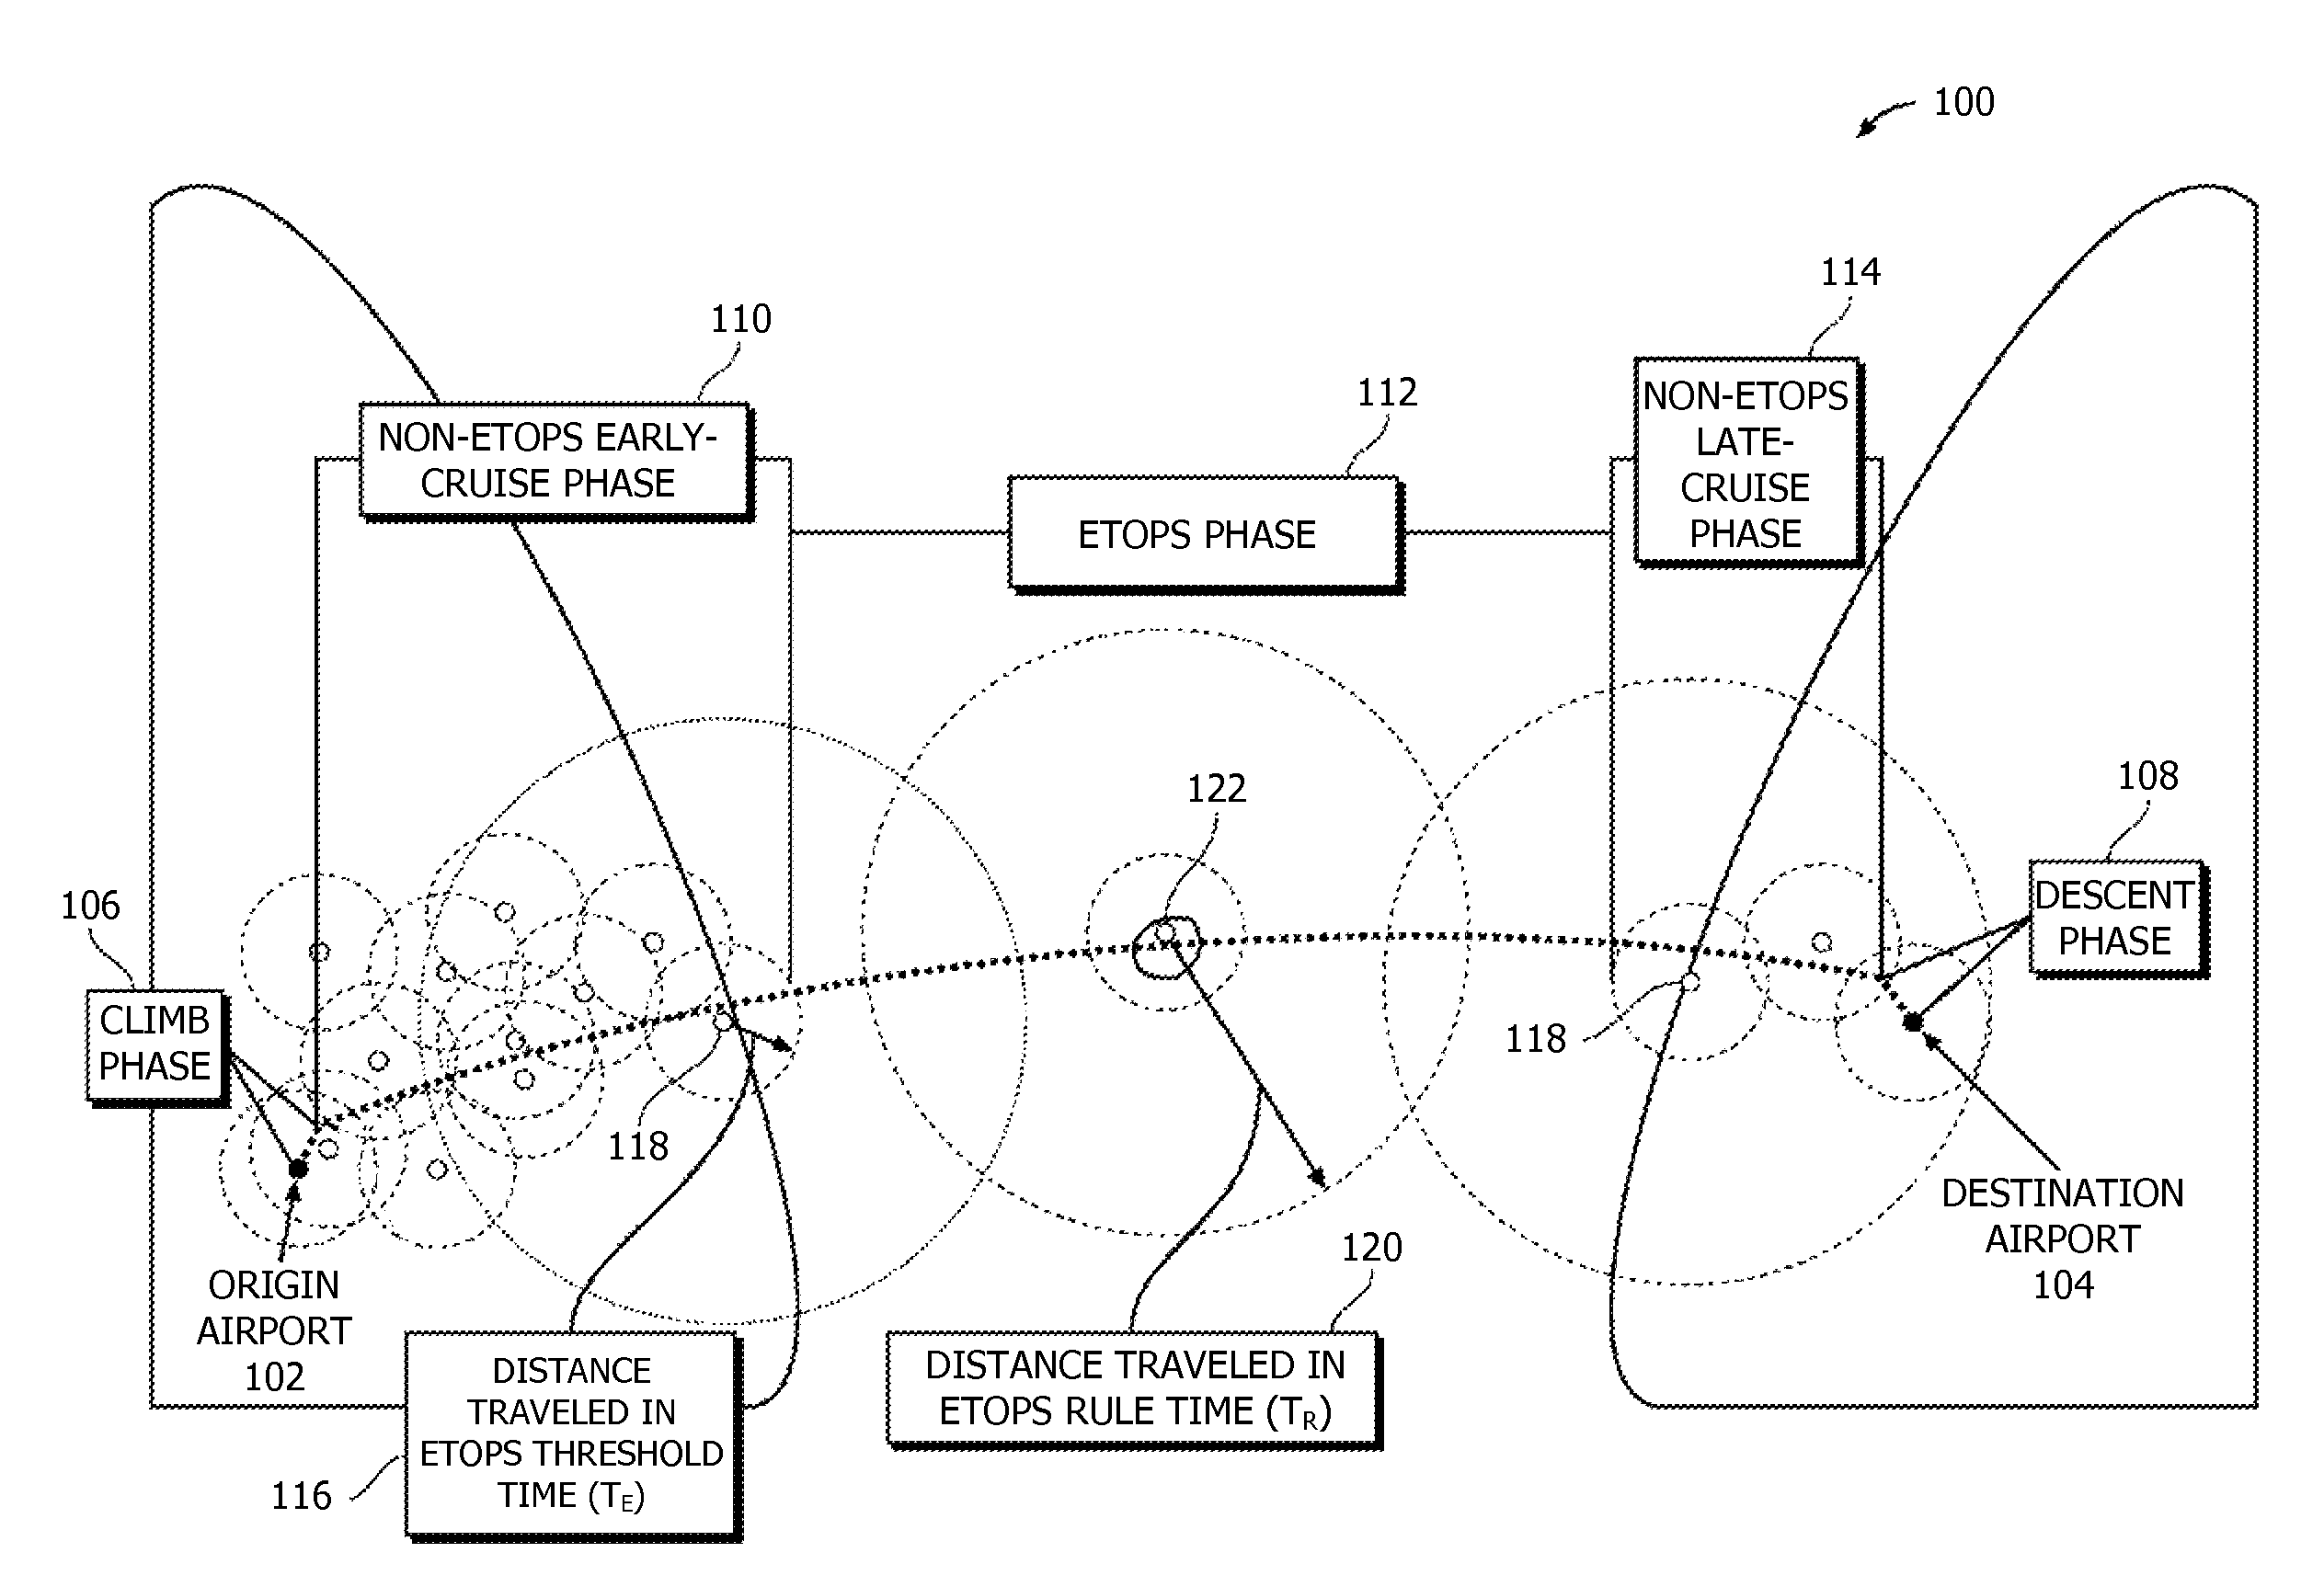 Establishing availability of a two-engine aircraft for an ETOPS flight or an ETOPS flight path for a two-engine aircraft